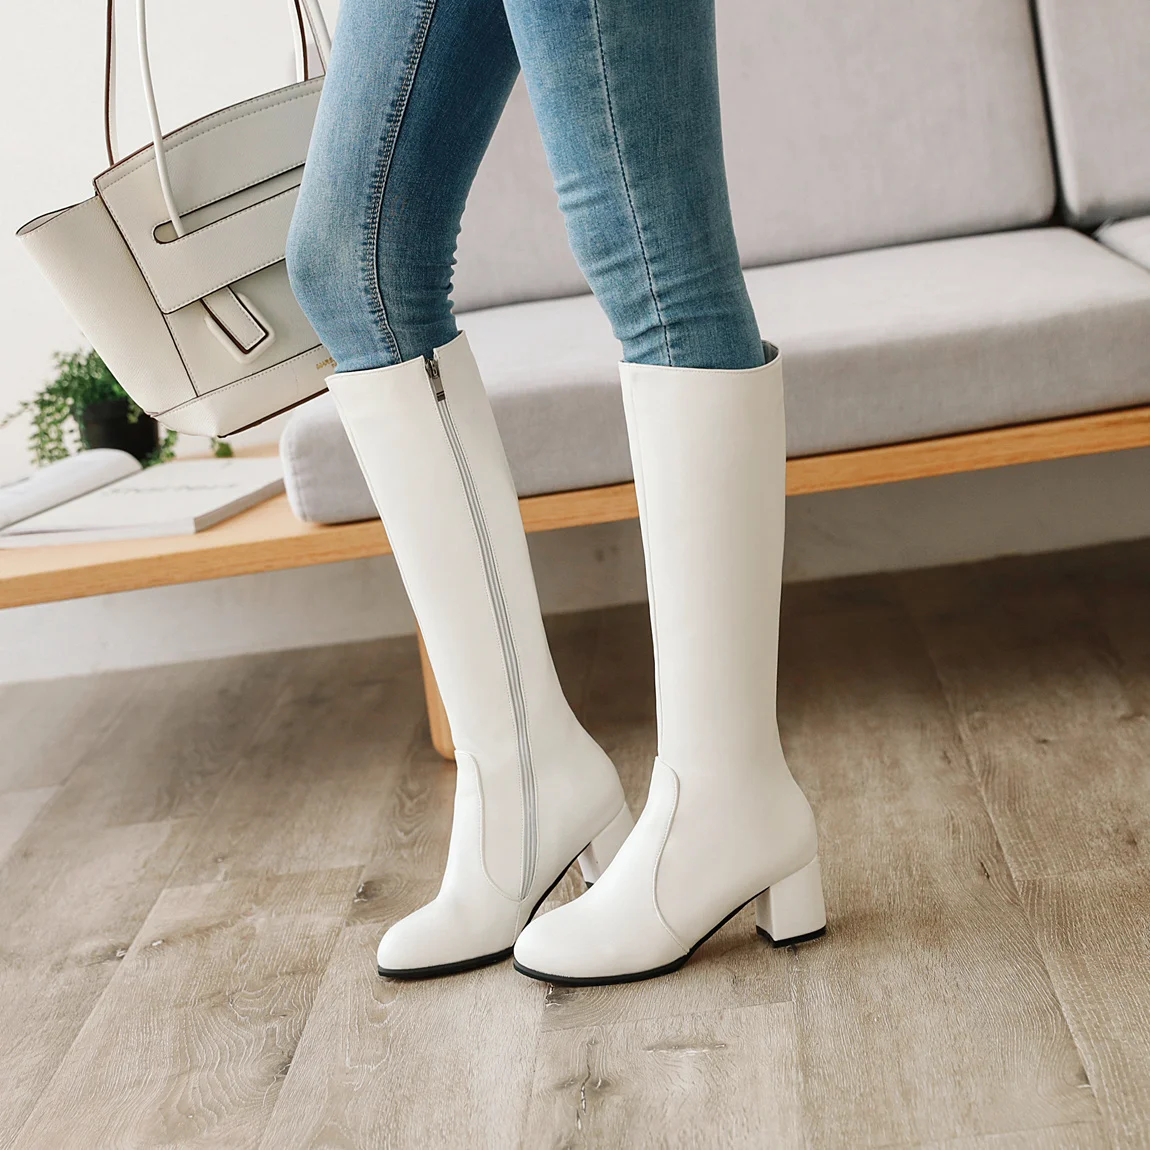 

2022 Autumn Winter High Heel Boots White Black Womens Shoes Long Knight Ride Knee High Boots Female Shoe Plus Size 45 46 47 48